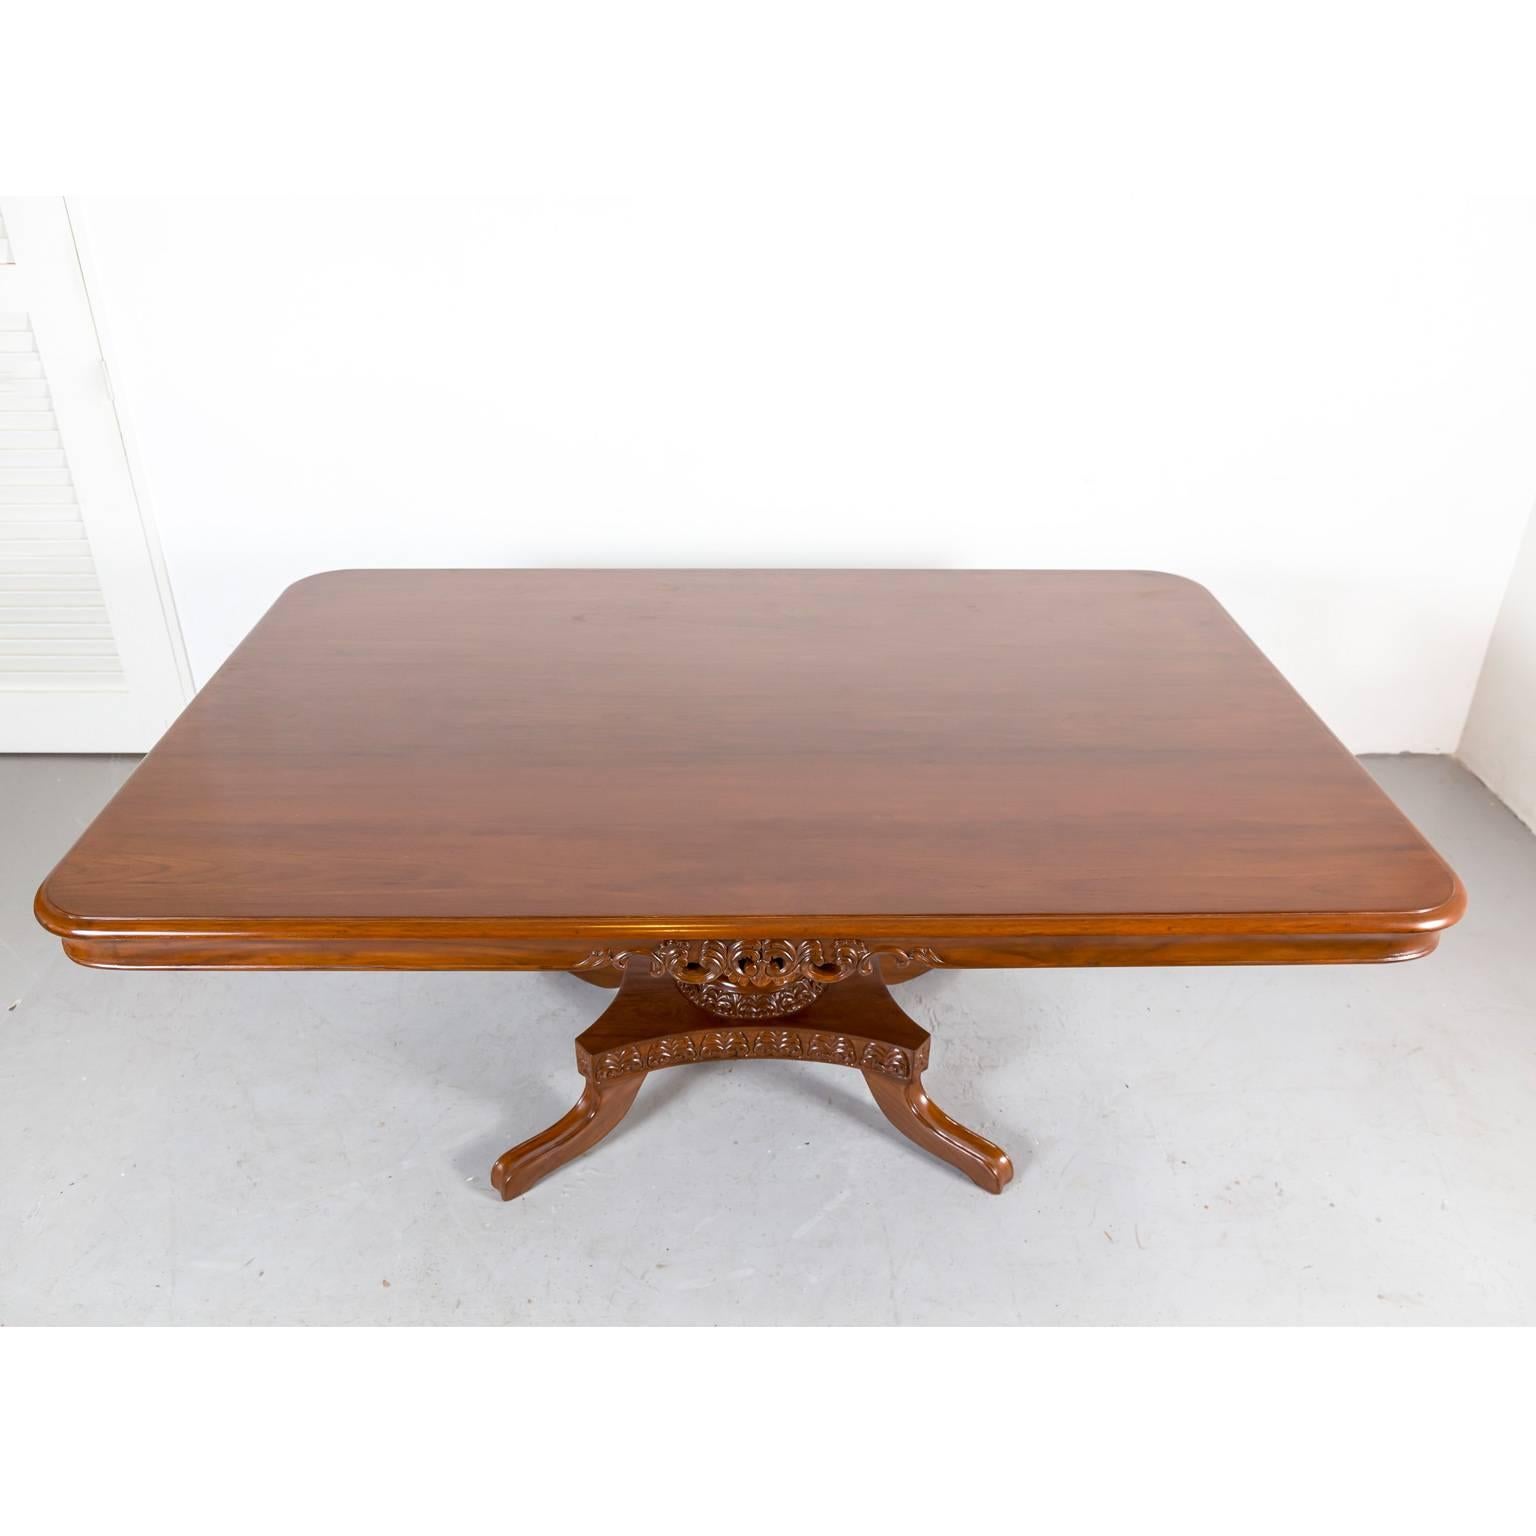 Antique Anglo-Indian or British Colonial Teak Wood Dining Table For Sale 5